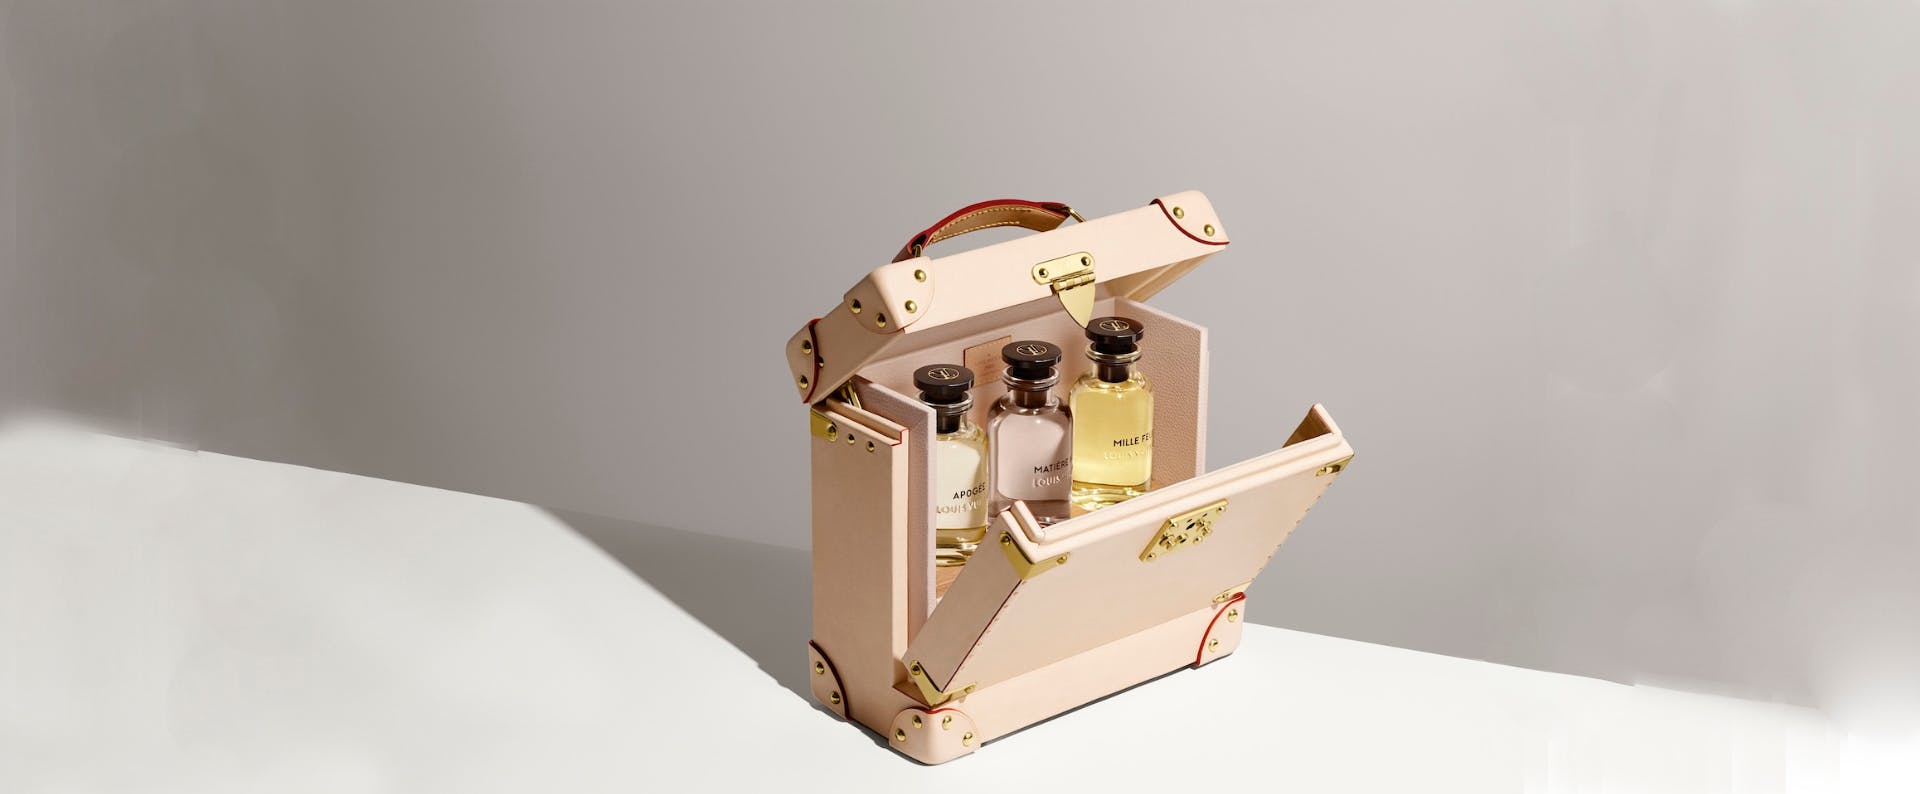 Louis Vuitton - Travel in style with new leather cases specially designed  for Louis Vuitton Fragrances. Discover the full collection of the seven  signature scents and their accessories, now available in stores